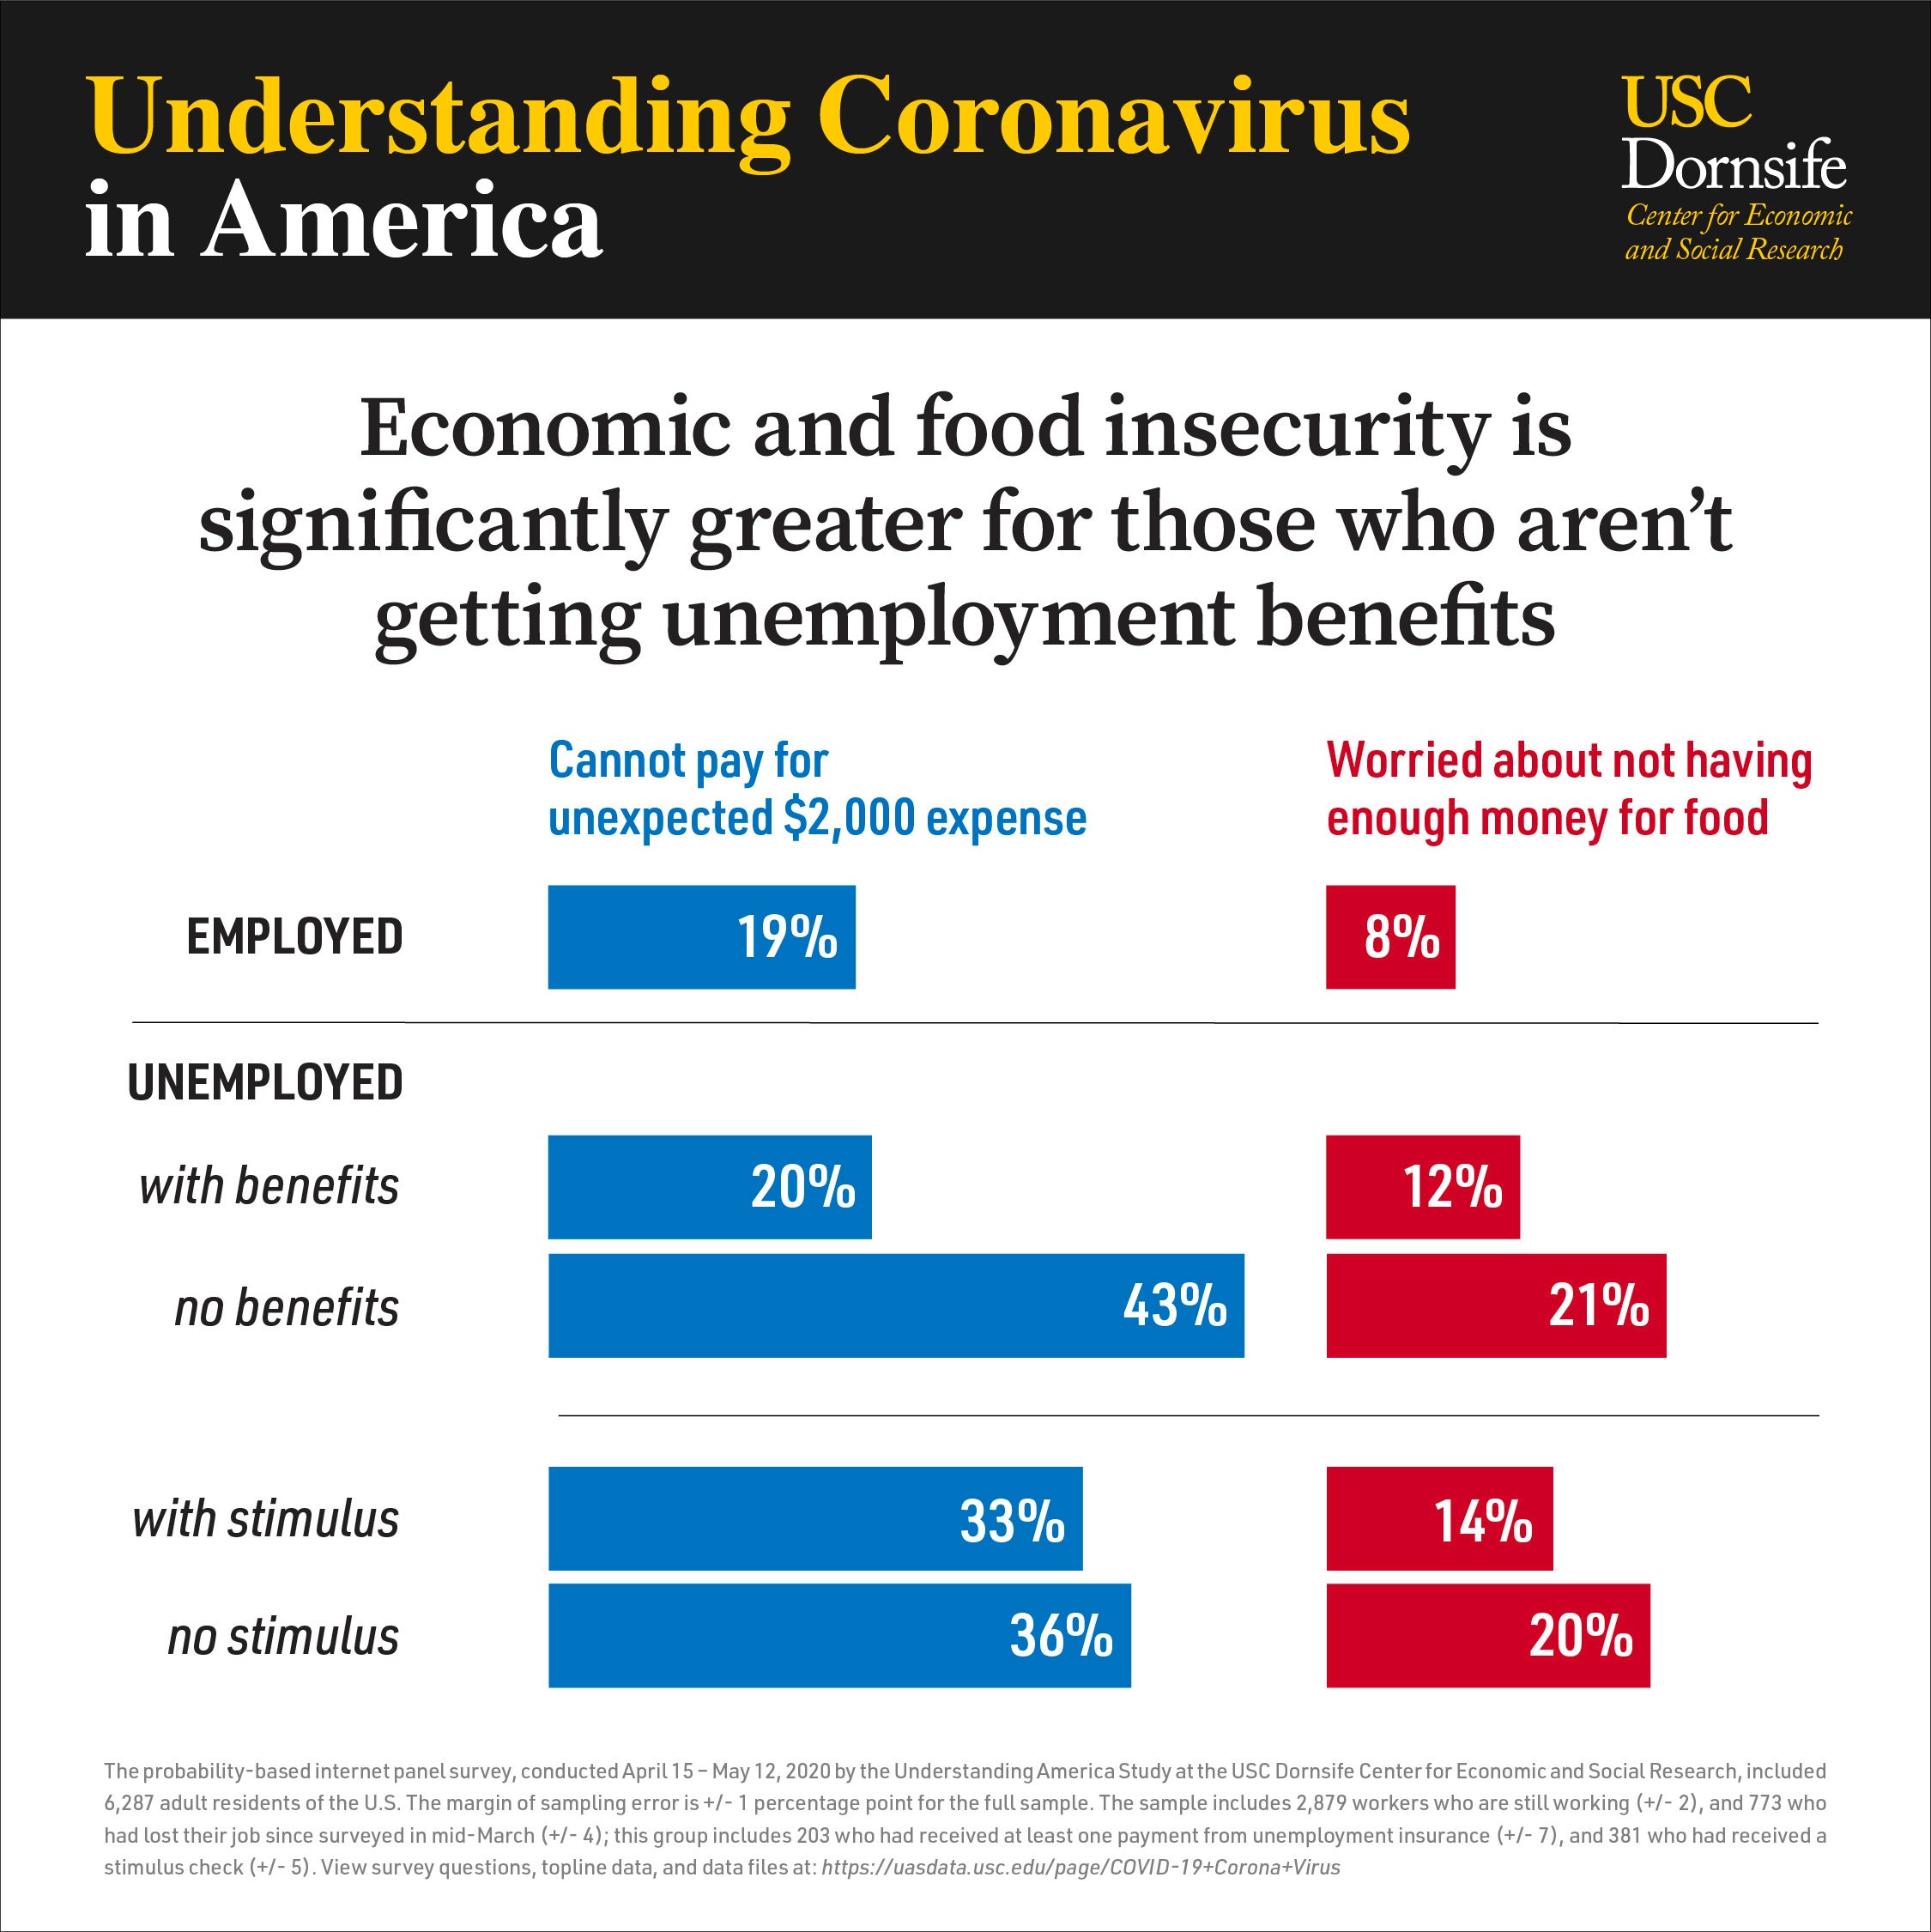 Chart showing economic and food insecurity